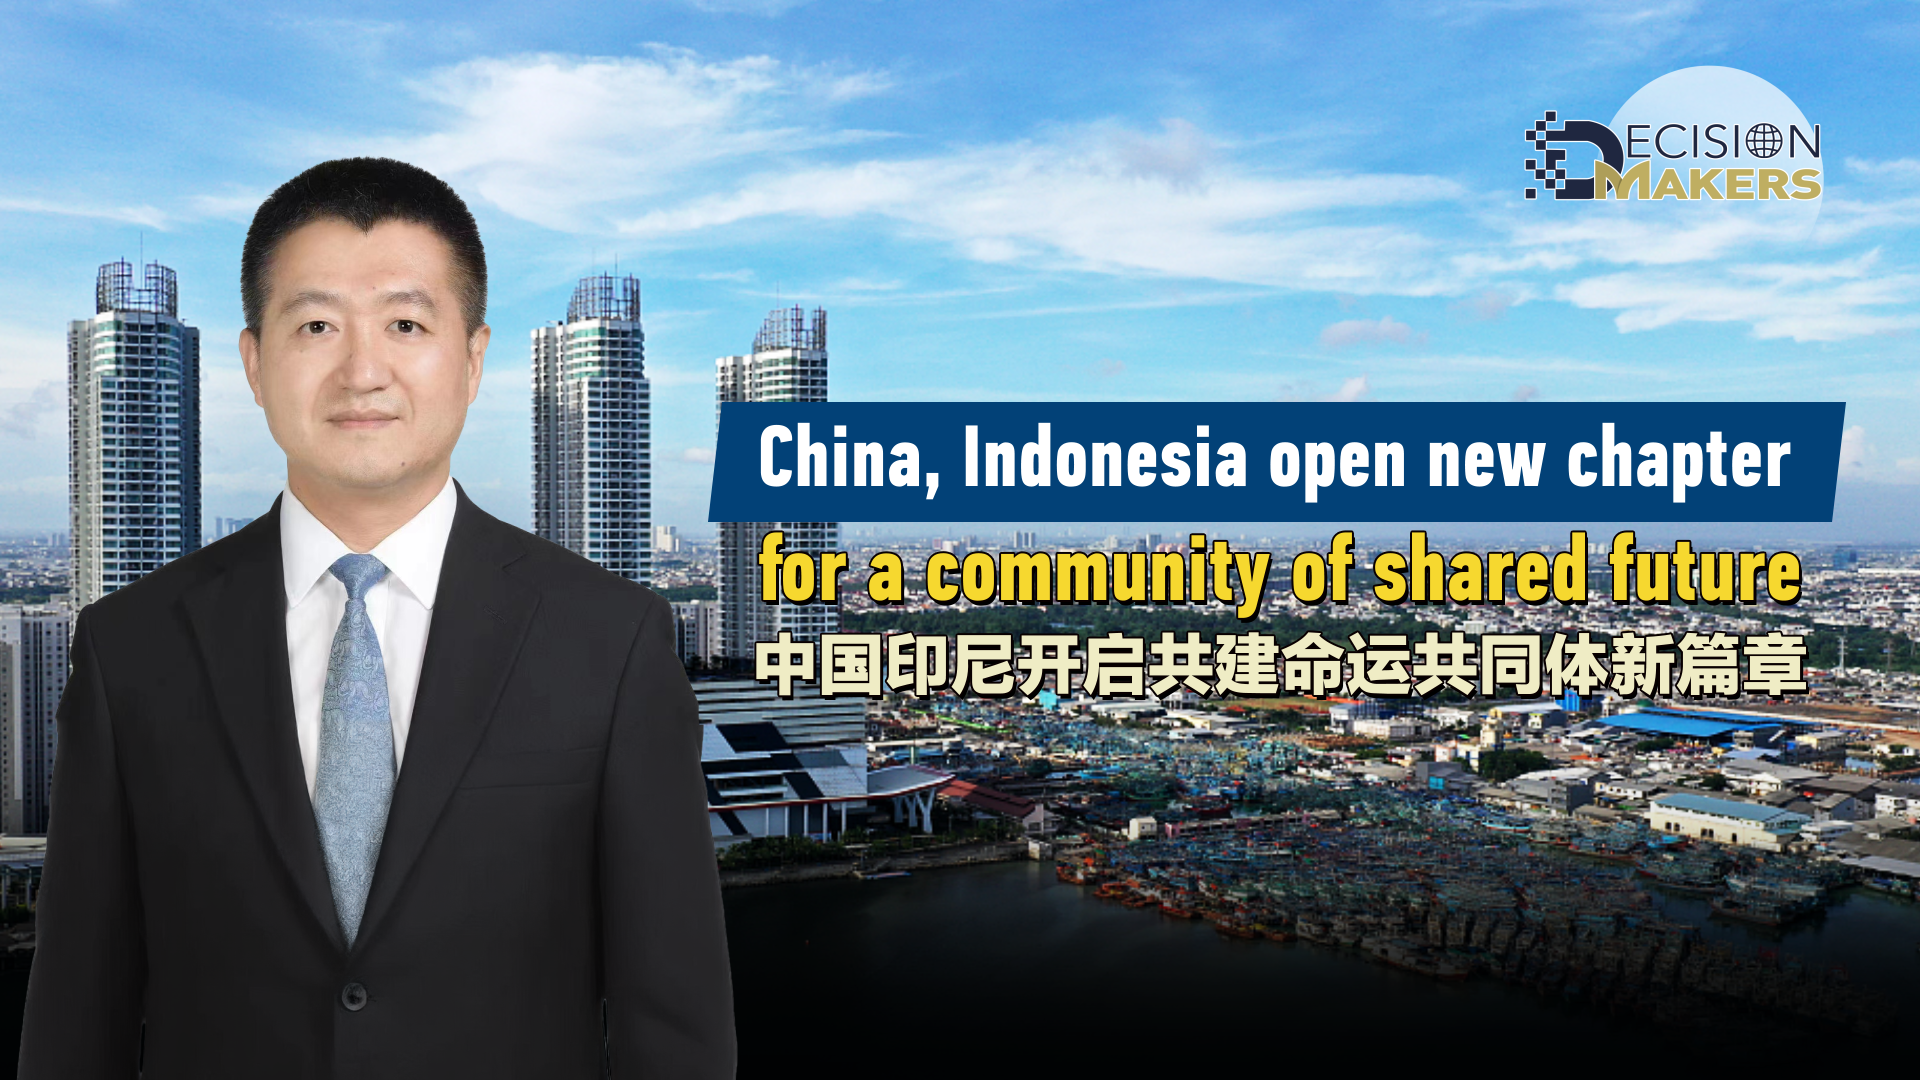 China, Indonesia open new chapter for a community of shared future